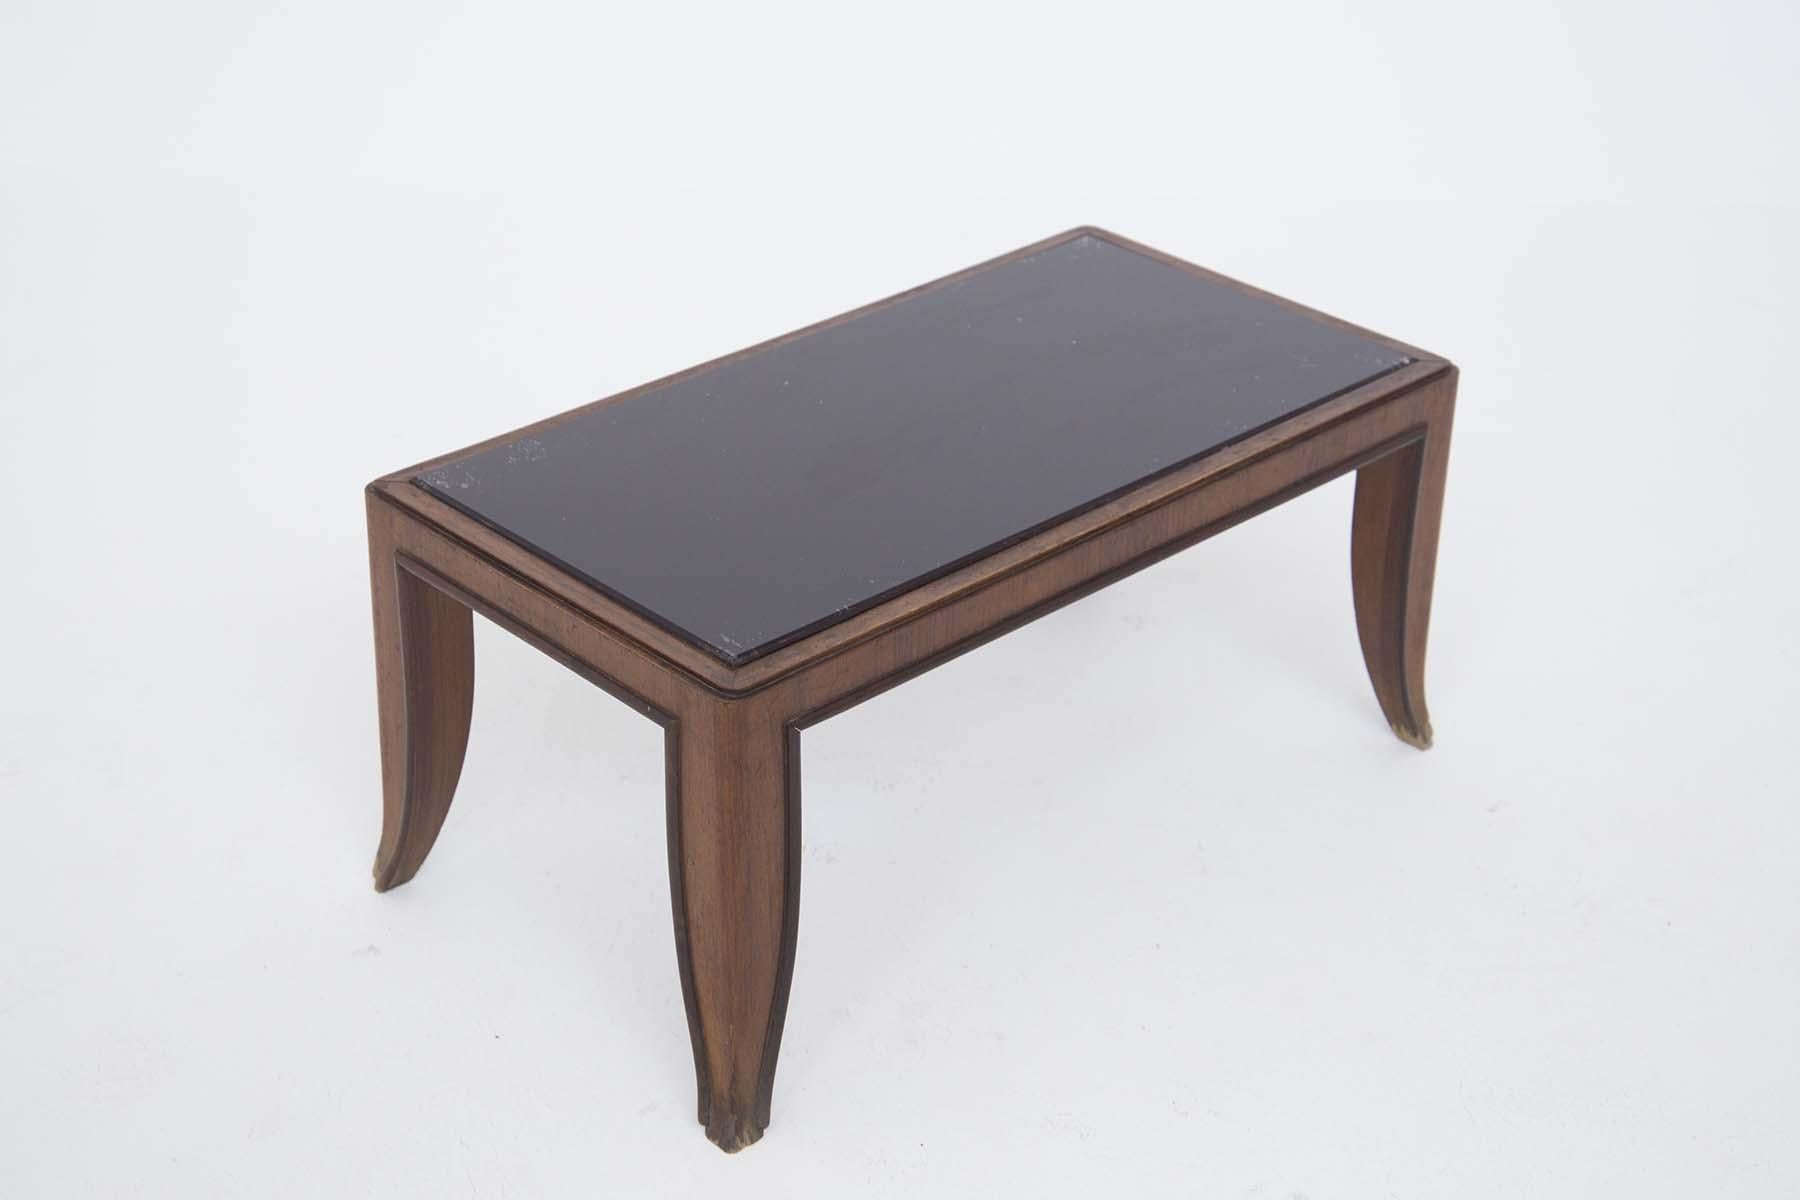 Mid-20th Century Italian Vintage Coffee Table Attr. to Gio Ponti, 1950s For Sale